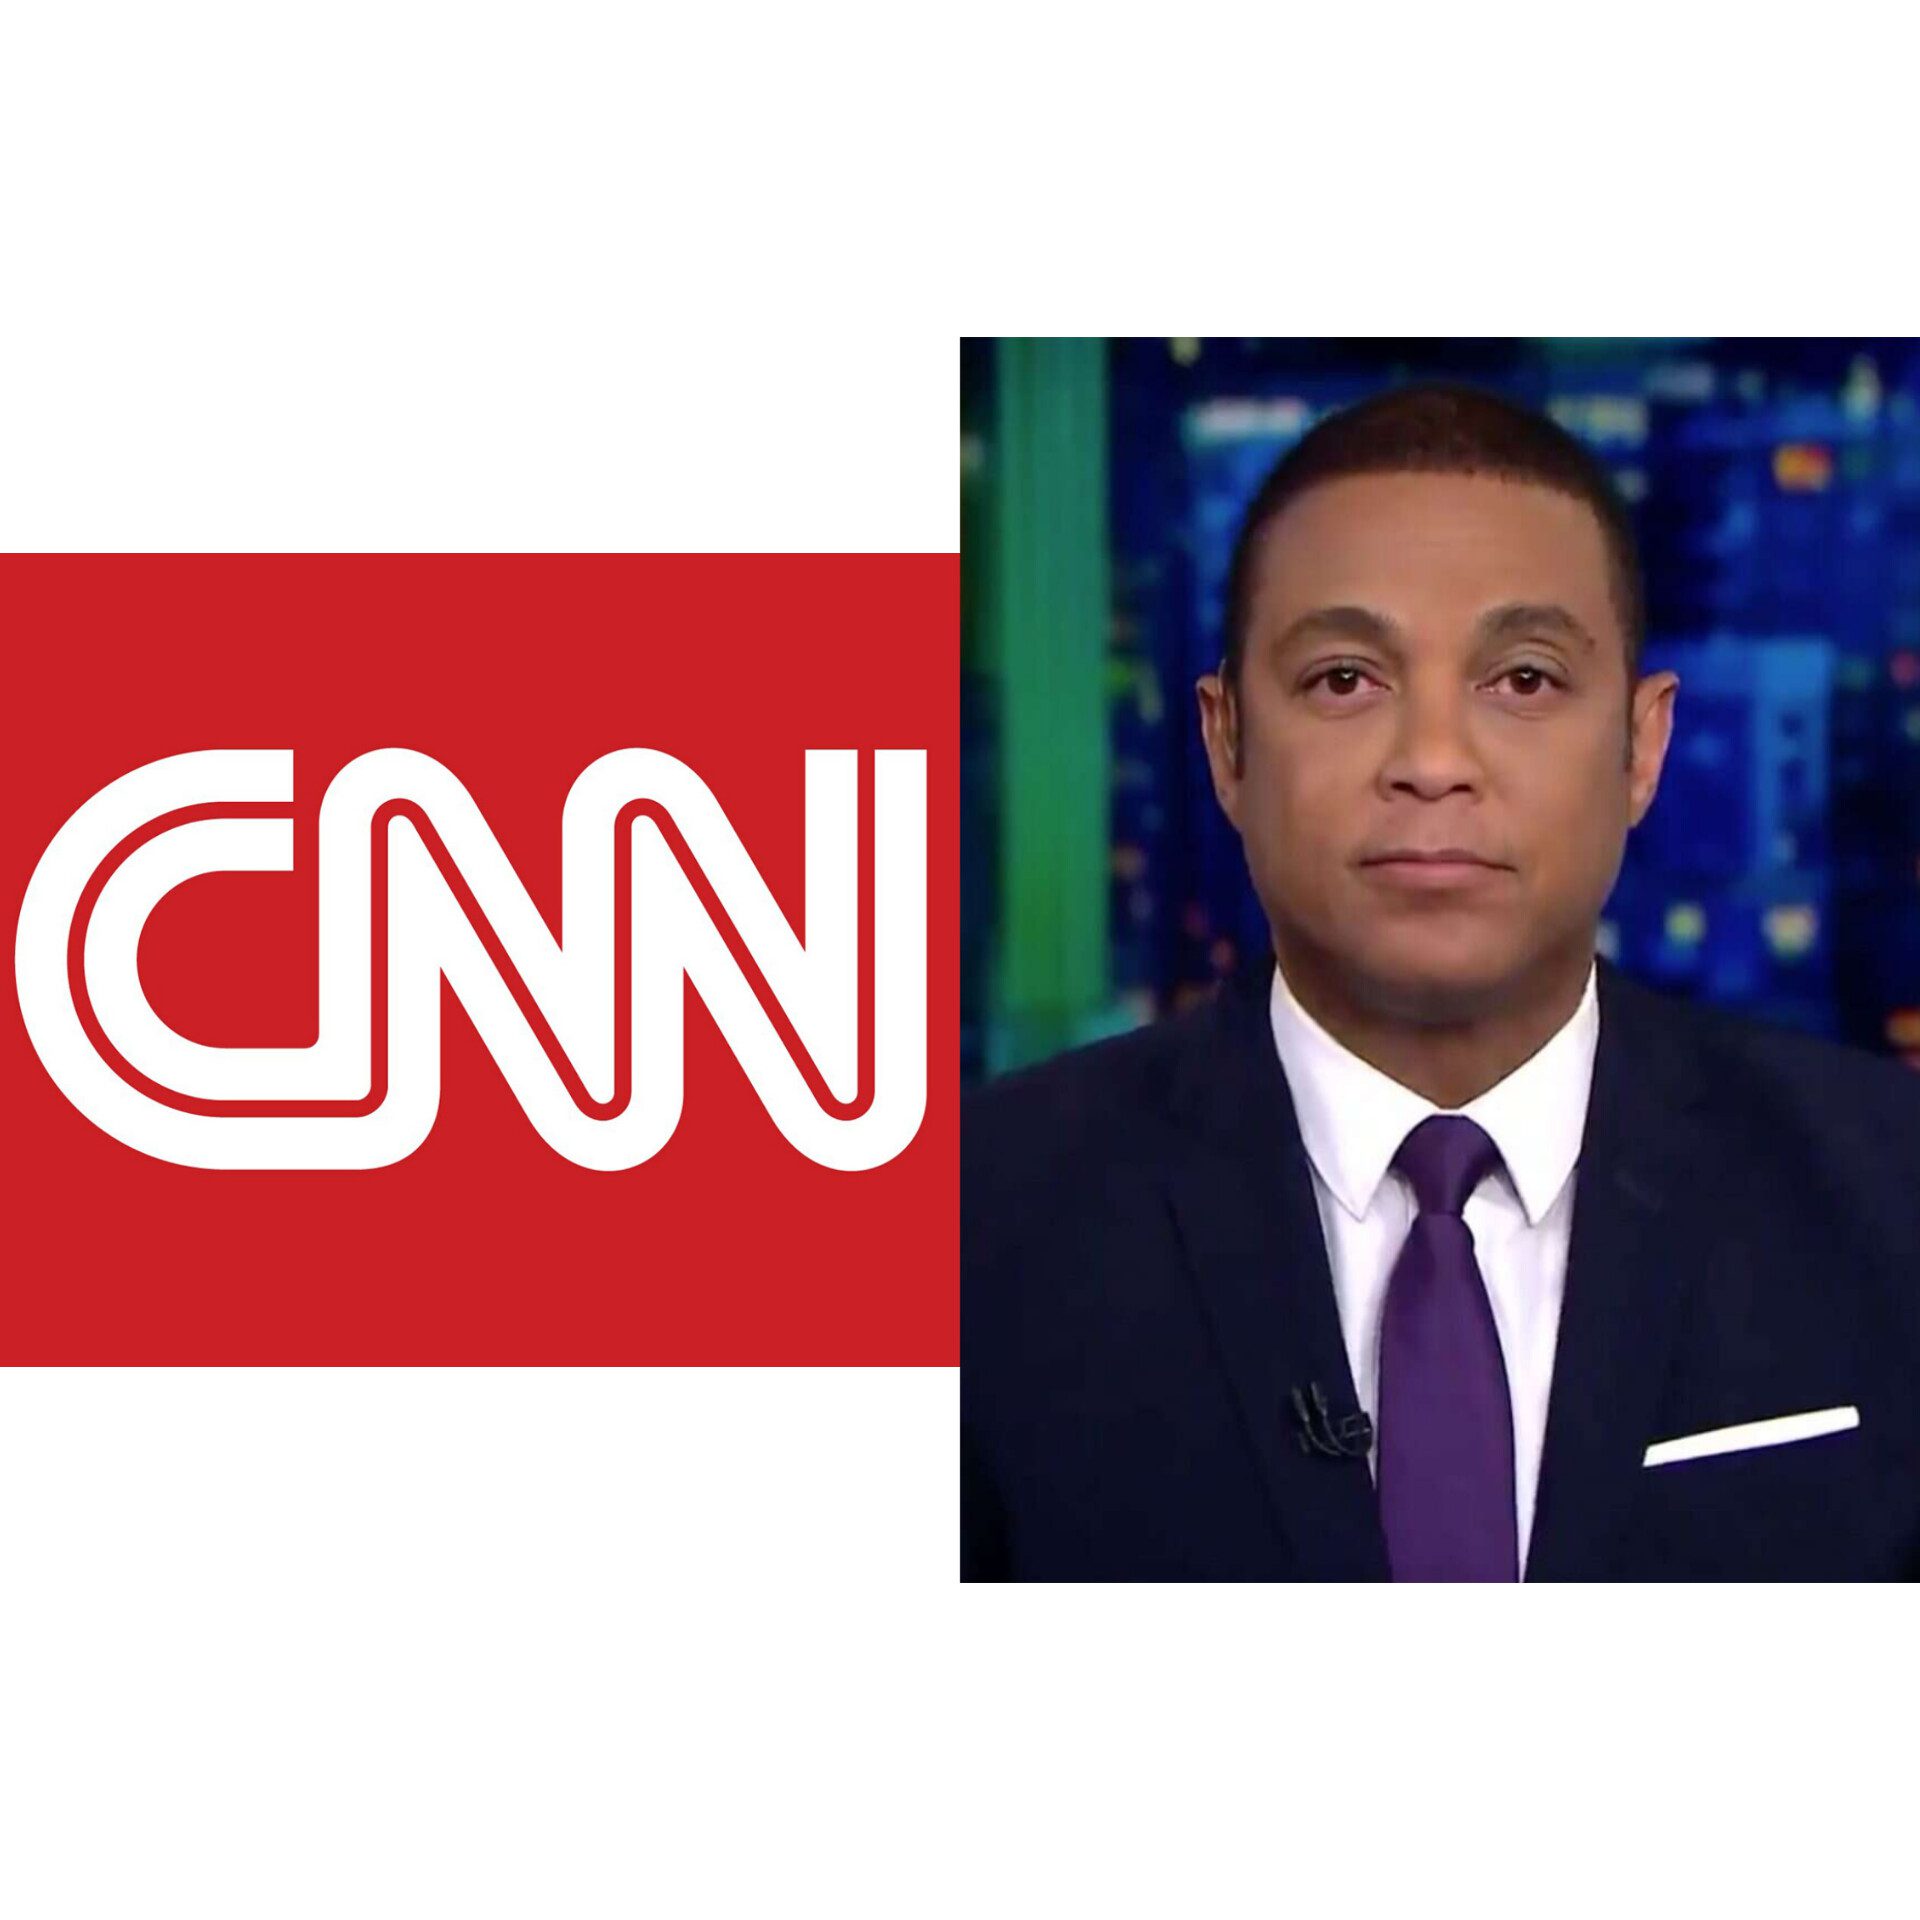 Fired CNN anchor, Don Lemon sets for a potential legal tussle even after $25 million payout from former employer